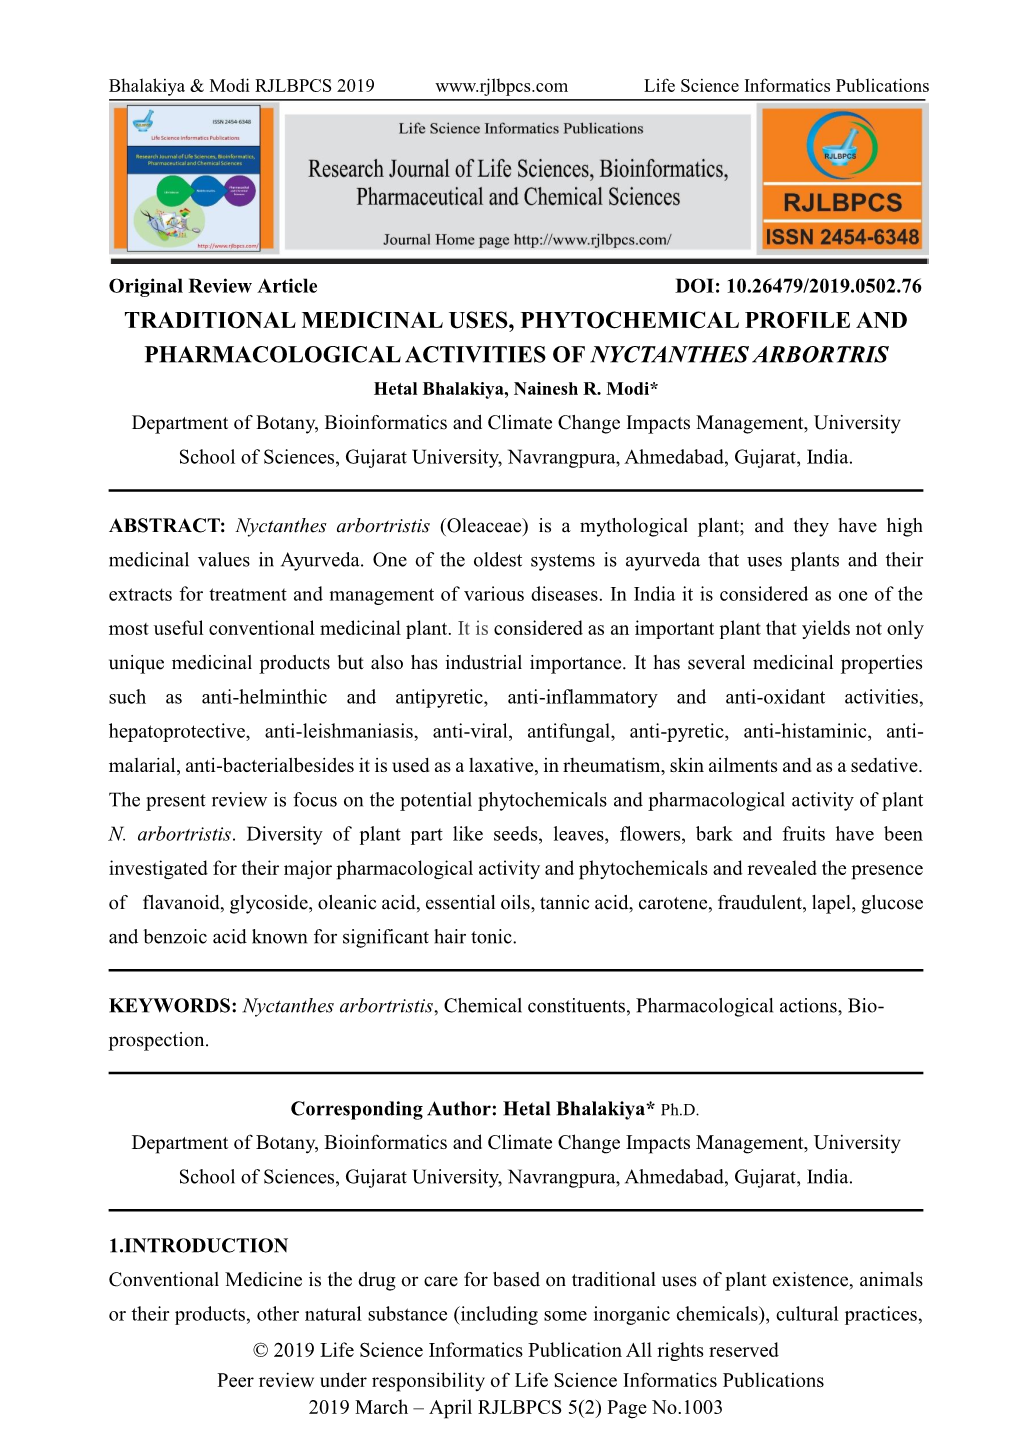 TRADITIONAL MEDICINAL USES, PHYTOCHEMICAL PROFILE and PHARMACOLOGICAL ACTIVITIES of NYCTANTHES ARBORTRIS Hetal Bhalakiya, Nainesh R